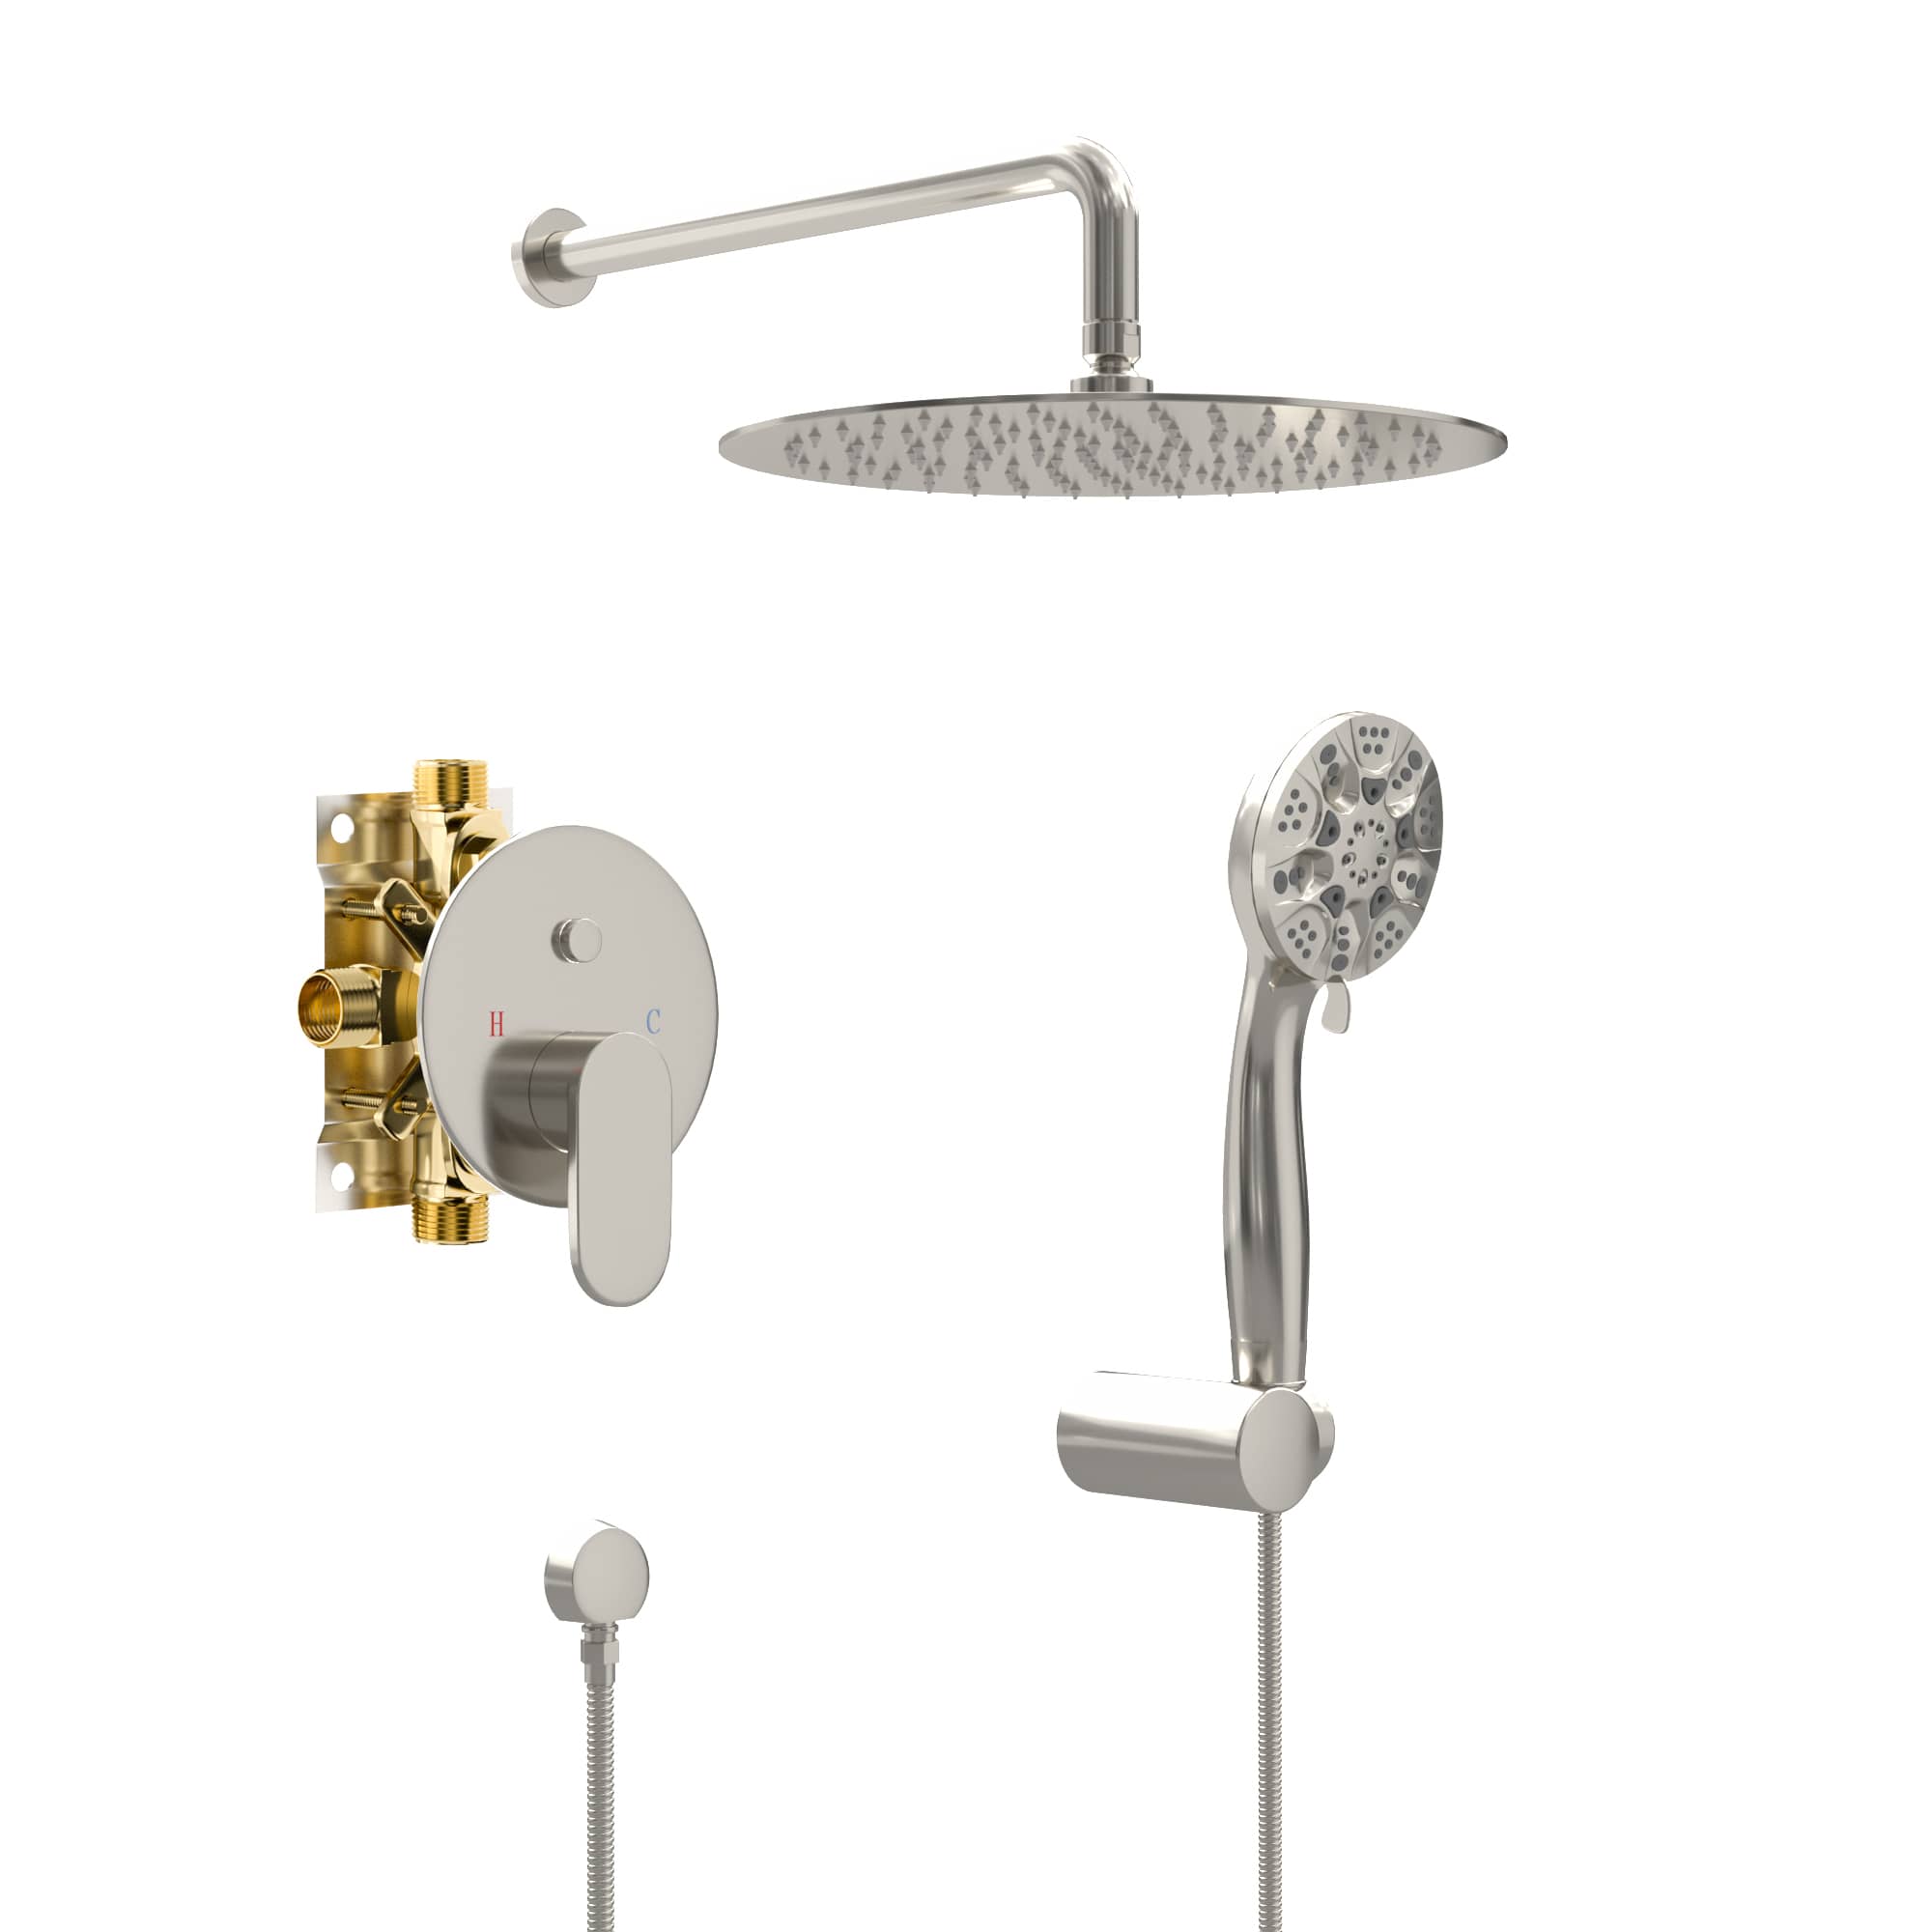 5-Spray Patterns 10 in. Wall Mounted Rain Fixed Shower Head w/ Dual Shower Heads with Pressure Balance in Brushed Nickel